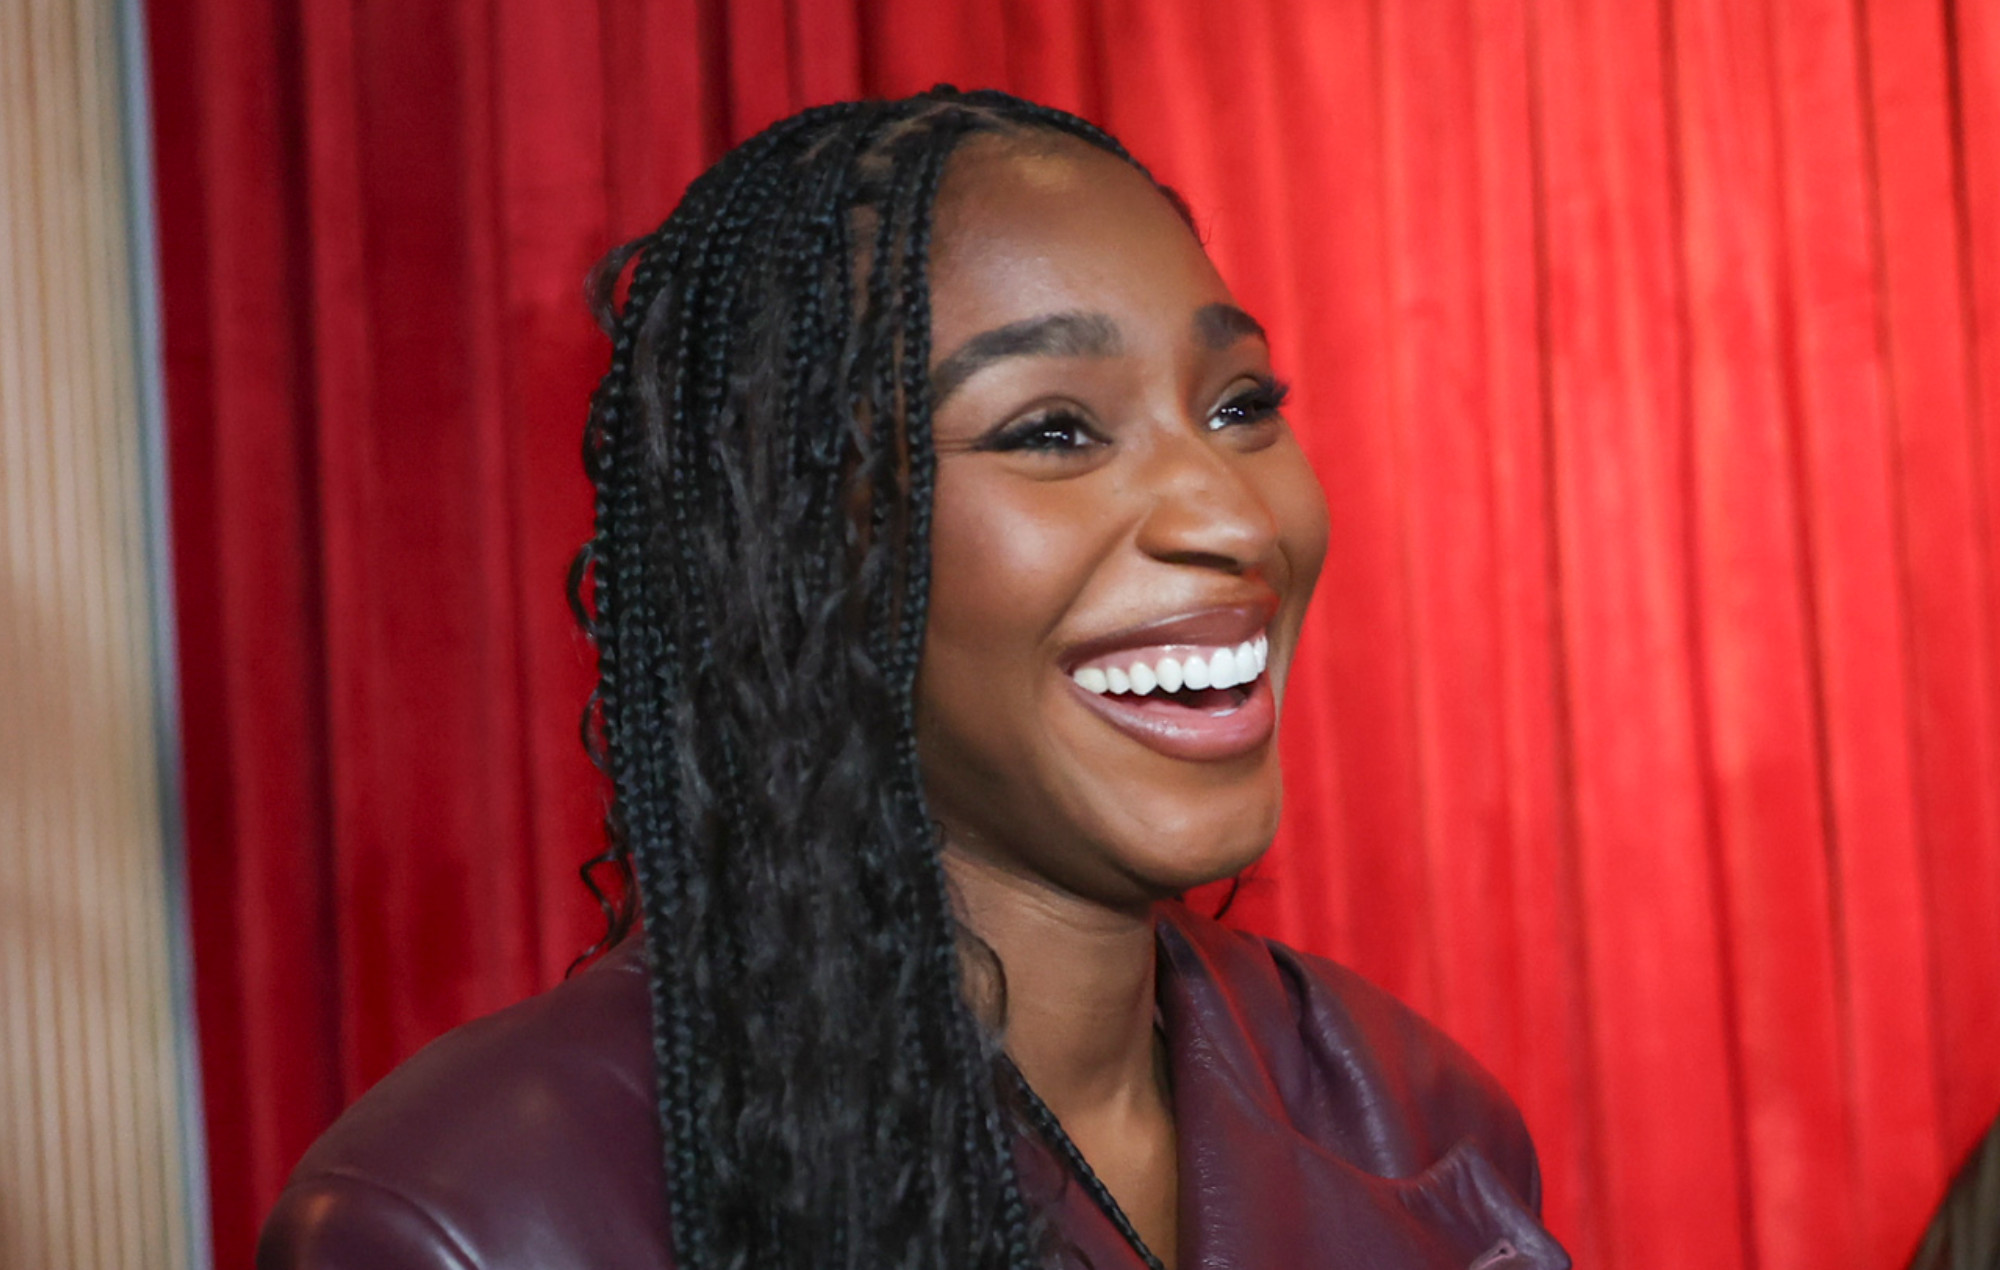 Normani at the Variety and Golden Globes Party at Sundance Film Festival. Photo credit: Katie Jones/Variety via Getty Images